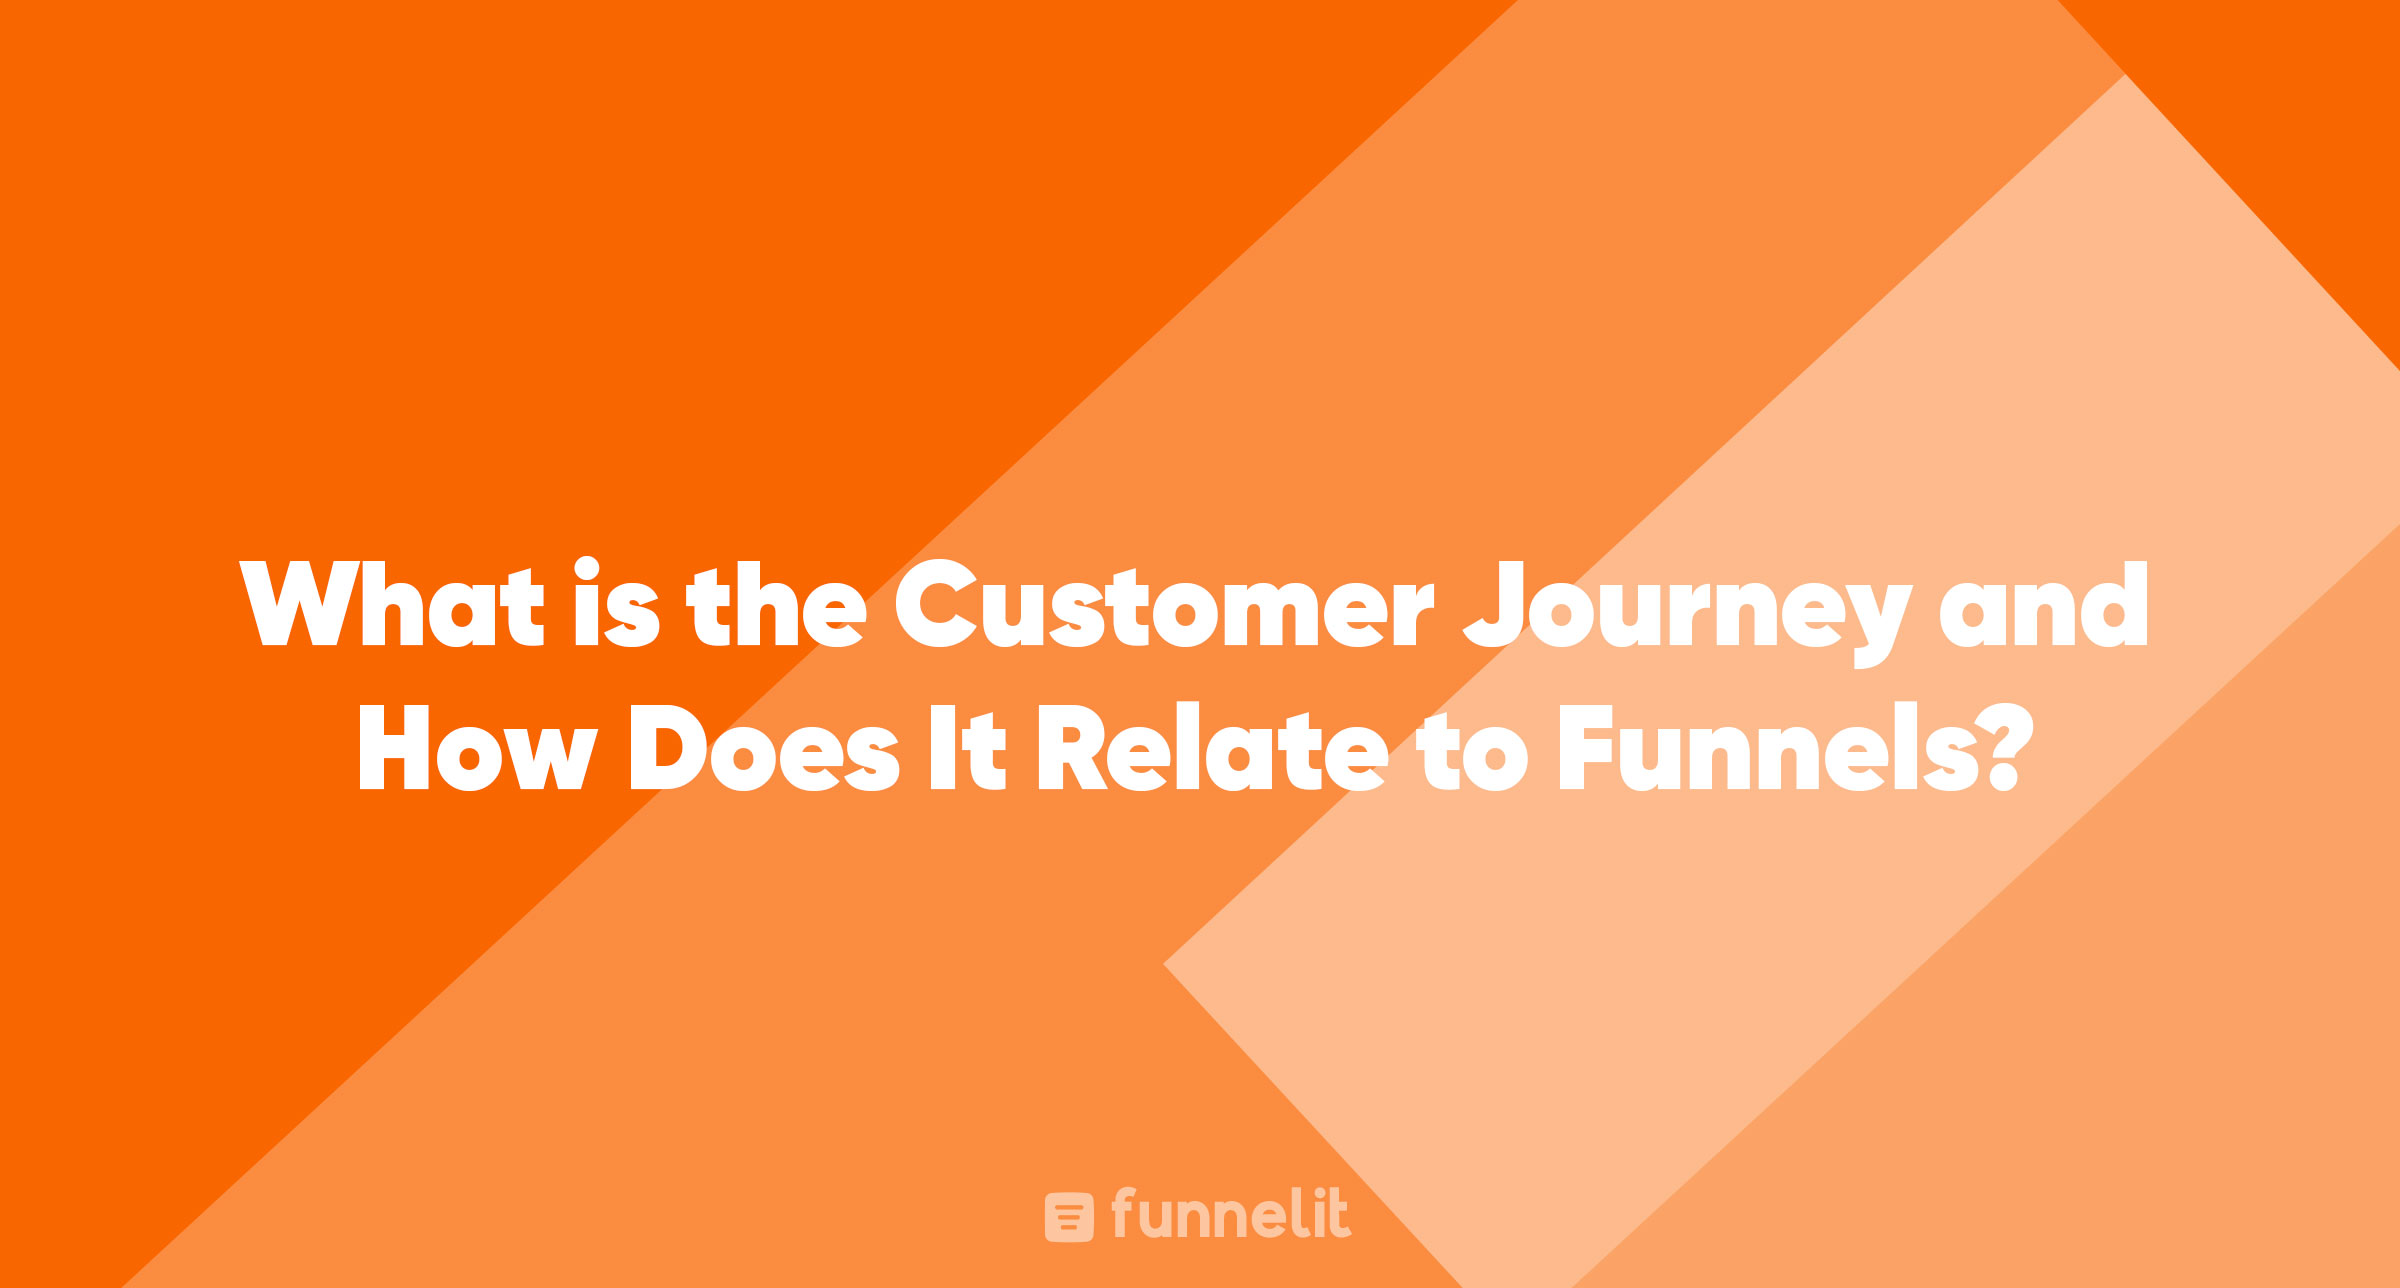 Article | What is the Customer Journey and How Does It Relate to Funnels?